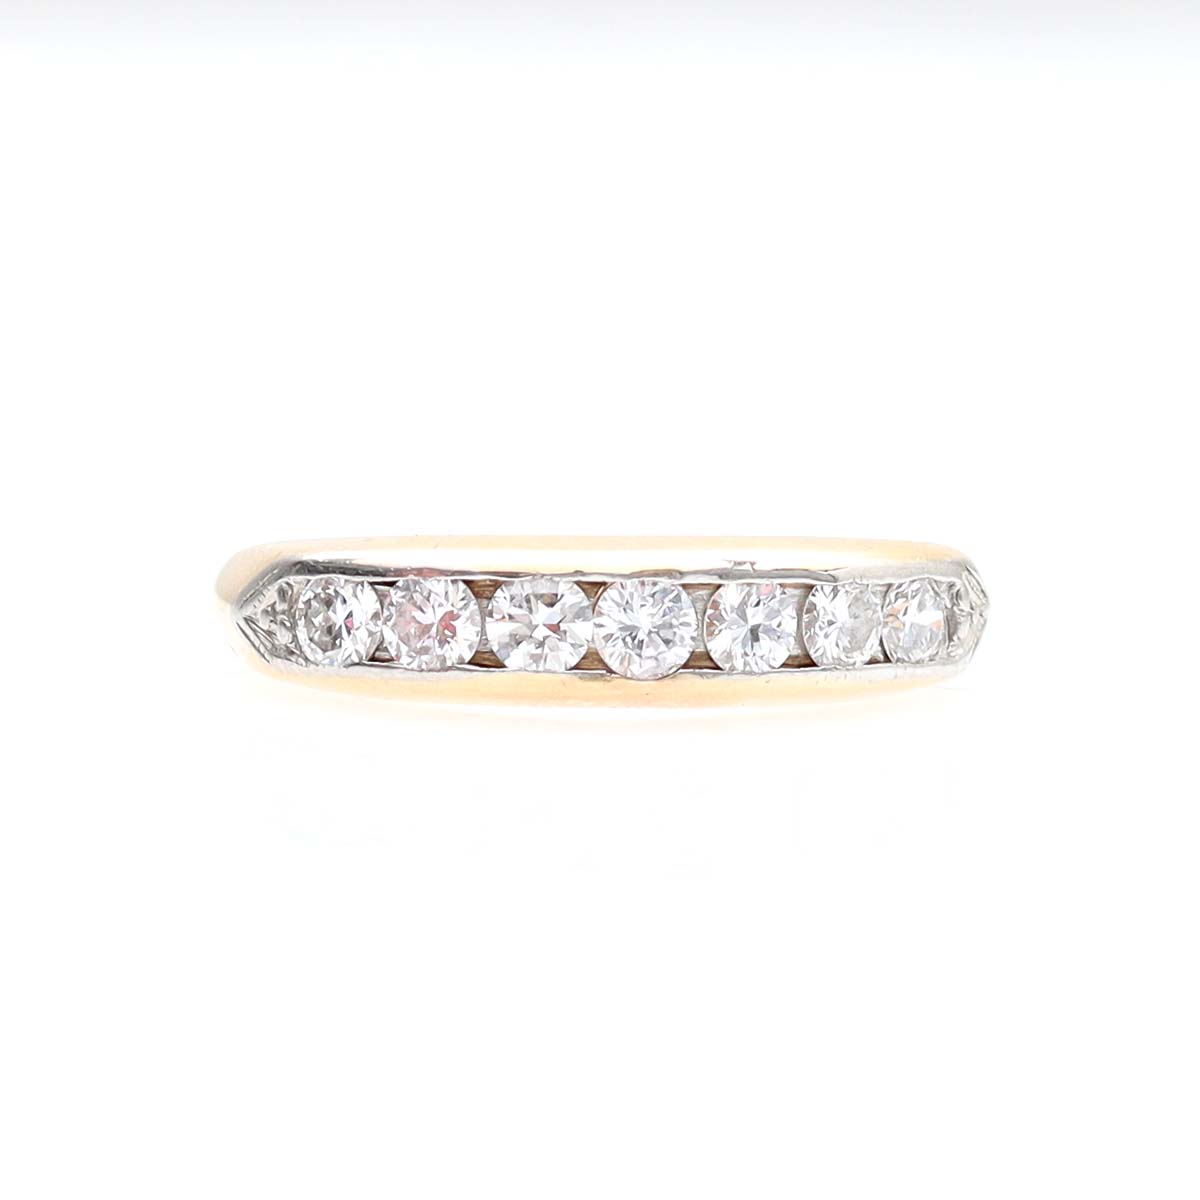 Gold and diamond wedding band. 0.70 cts total weight #VWB-46 - Leigh Jay & Co